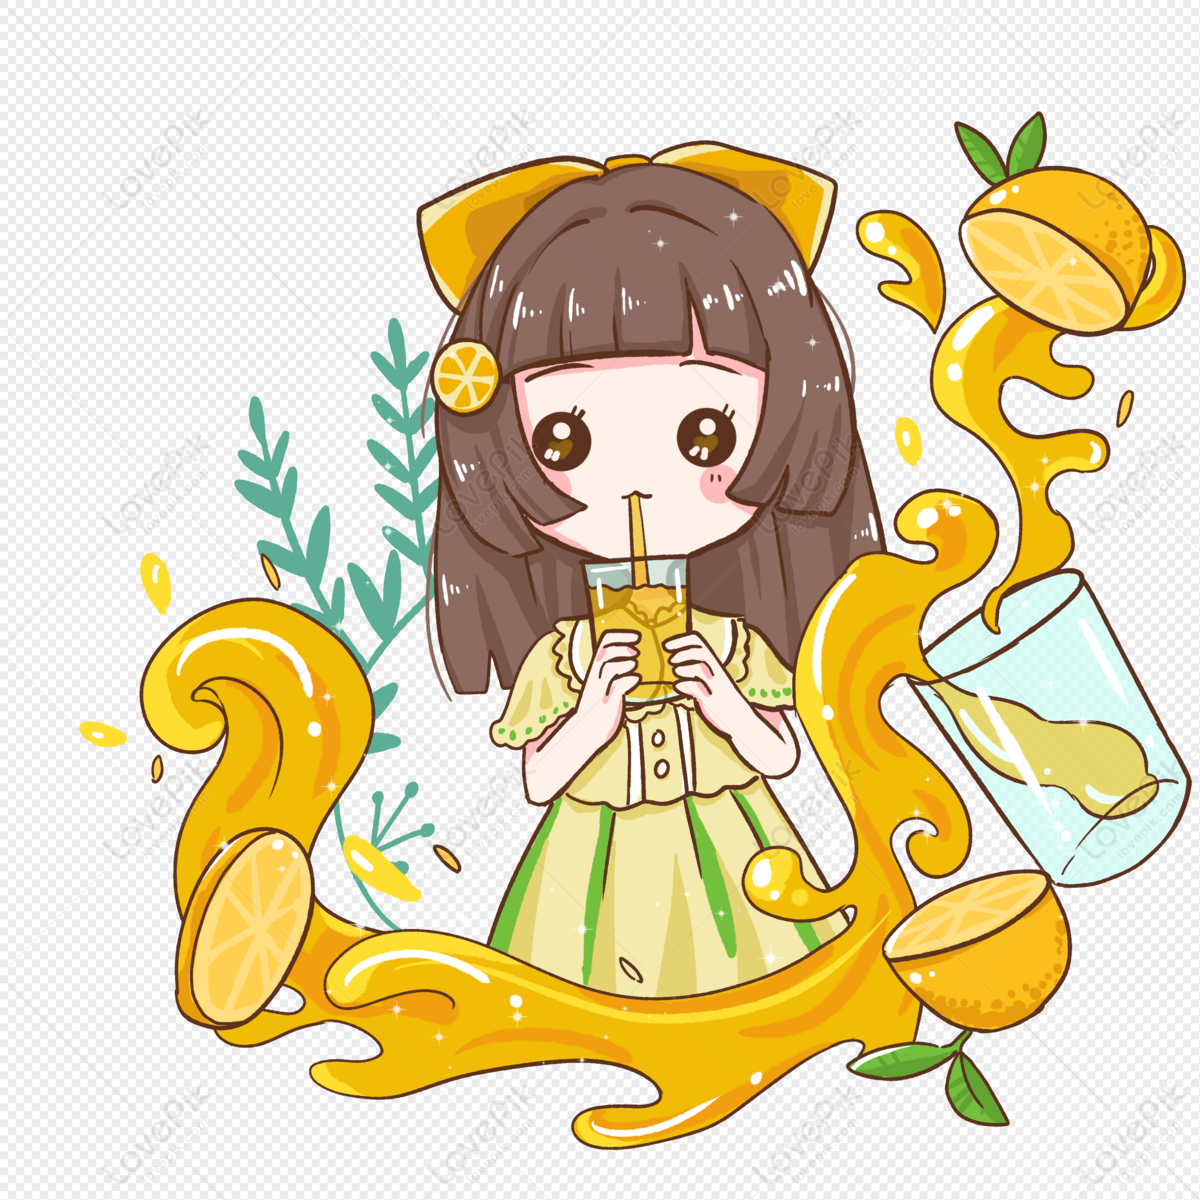 Girl Drinking Orange Juice PNG White Transparent And Clipart Image For Free  Download - Lovepik | 401764352